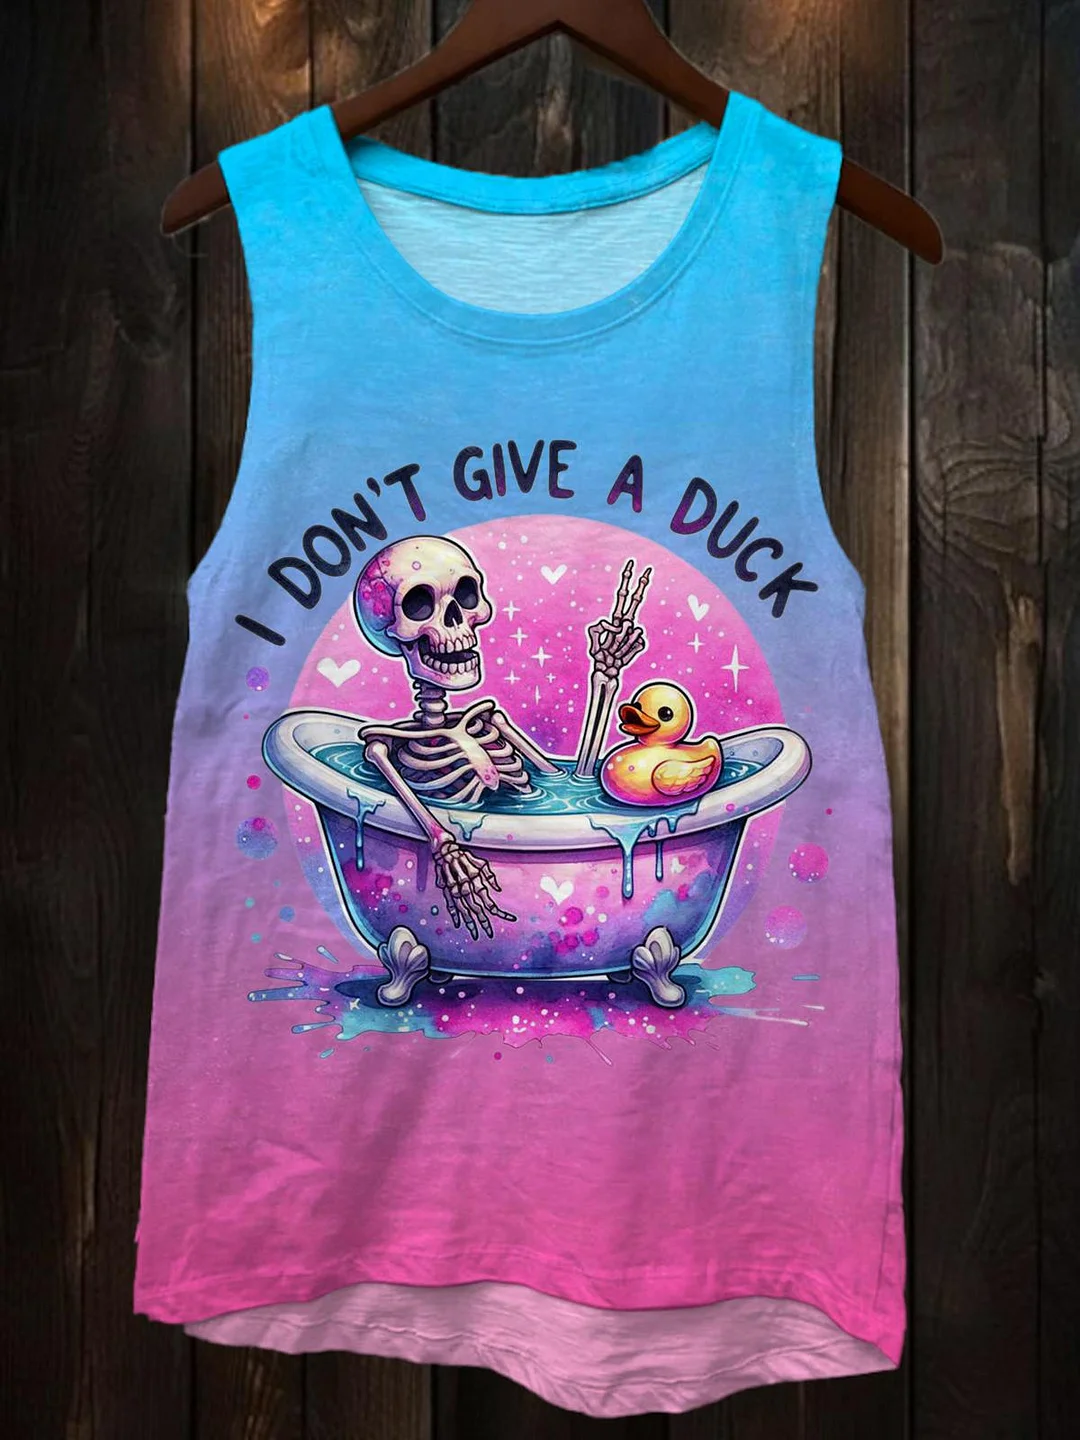 I Don't Give A Duck Printed Women's Vest